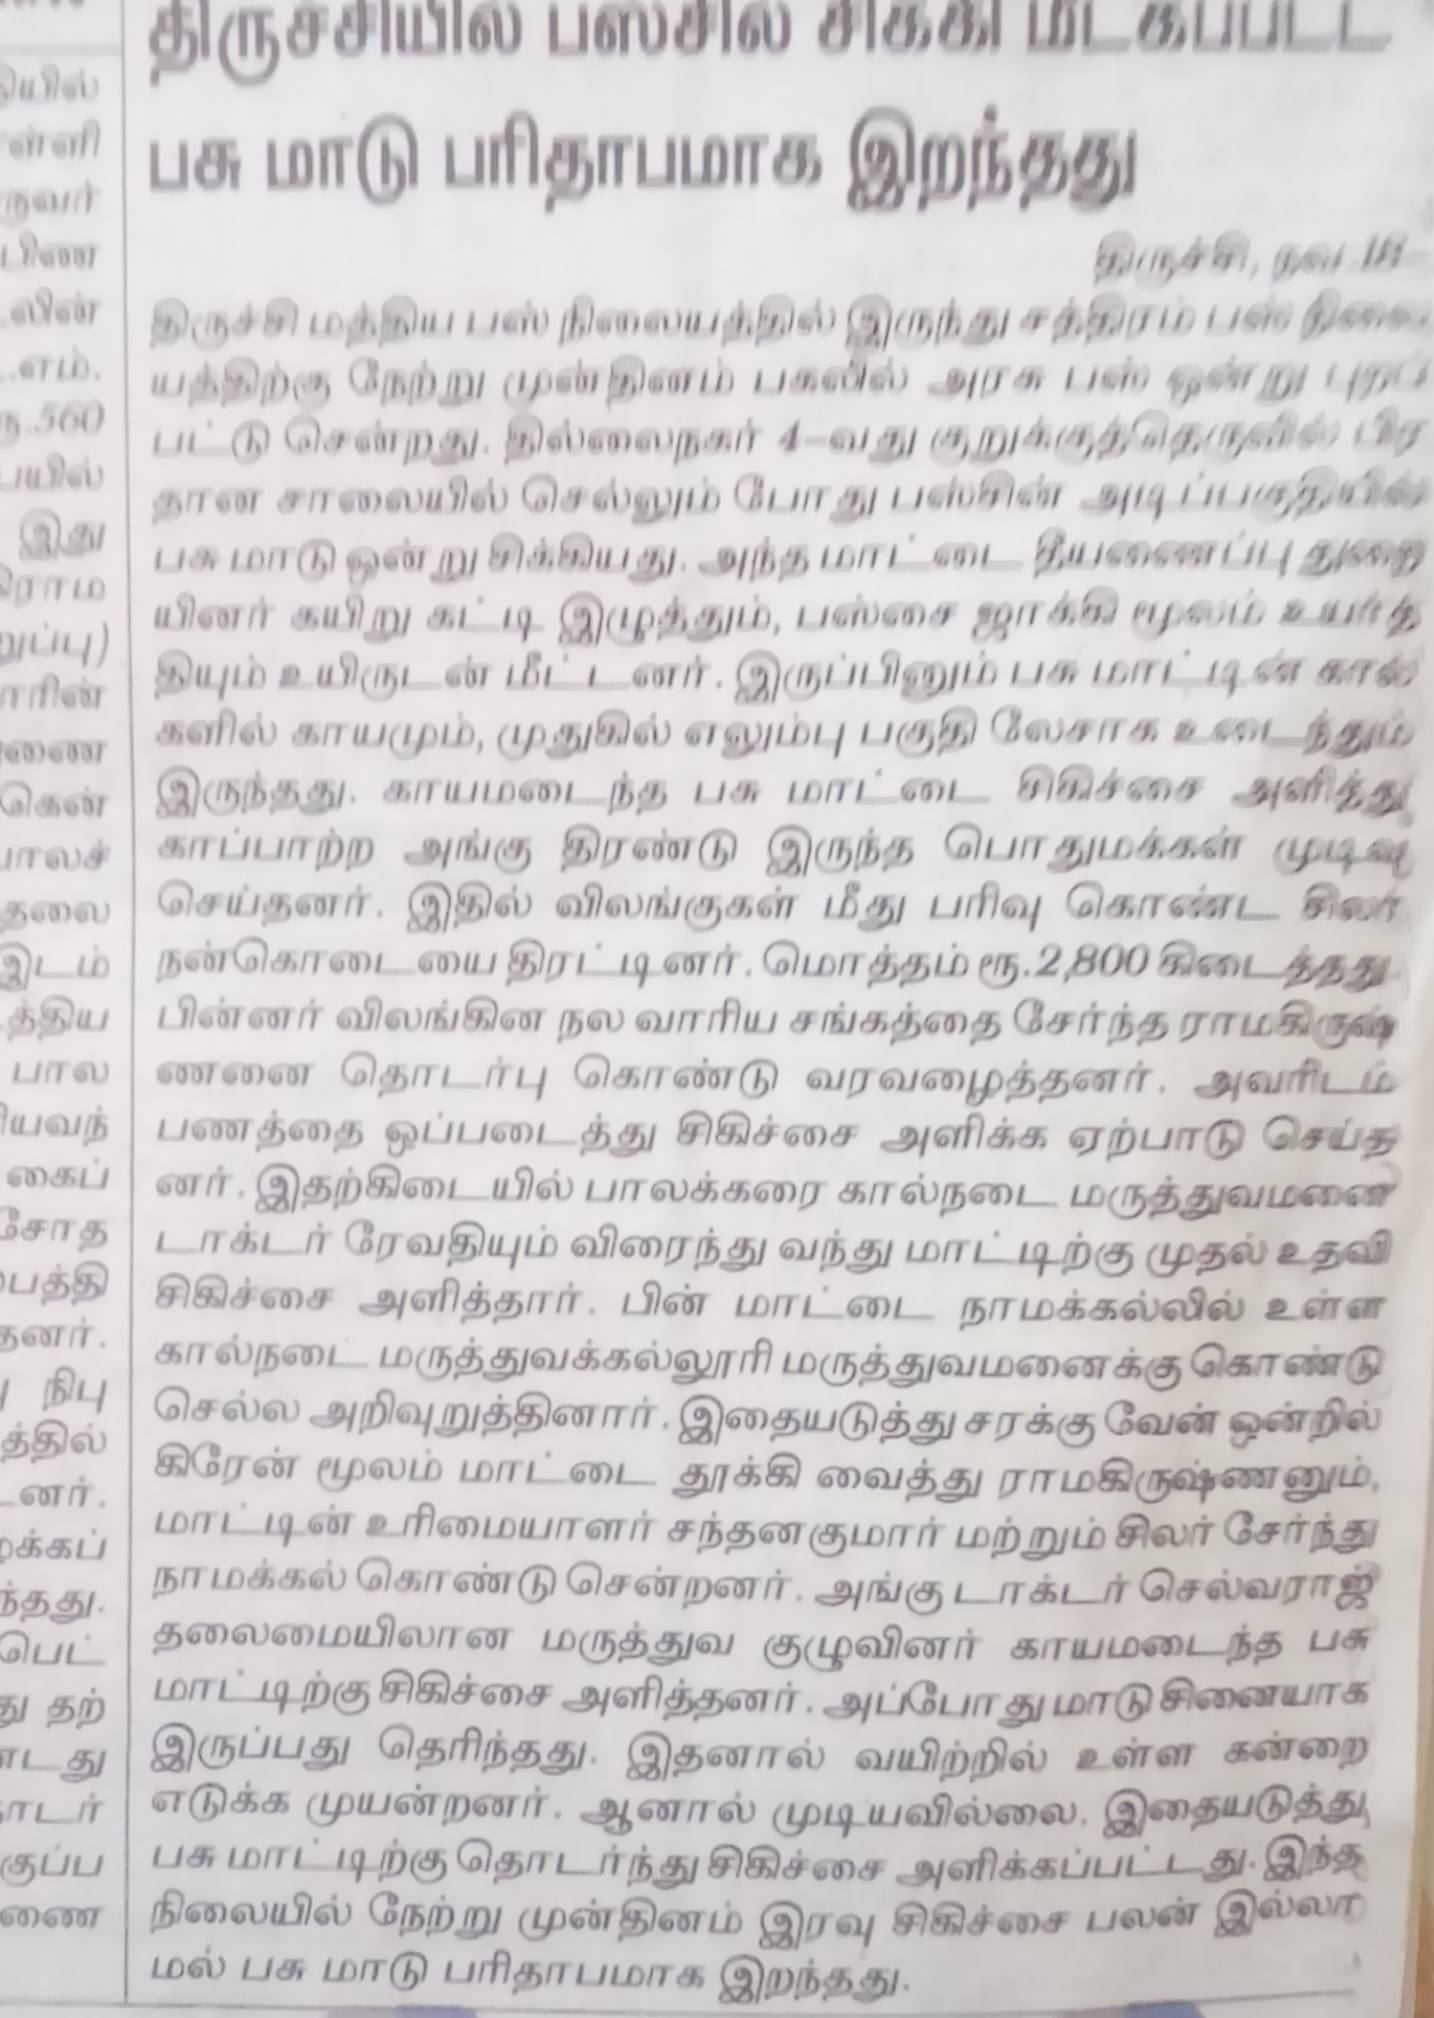 Trichy City ABC Issues